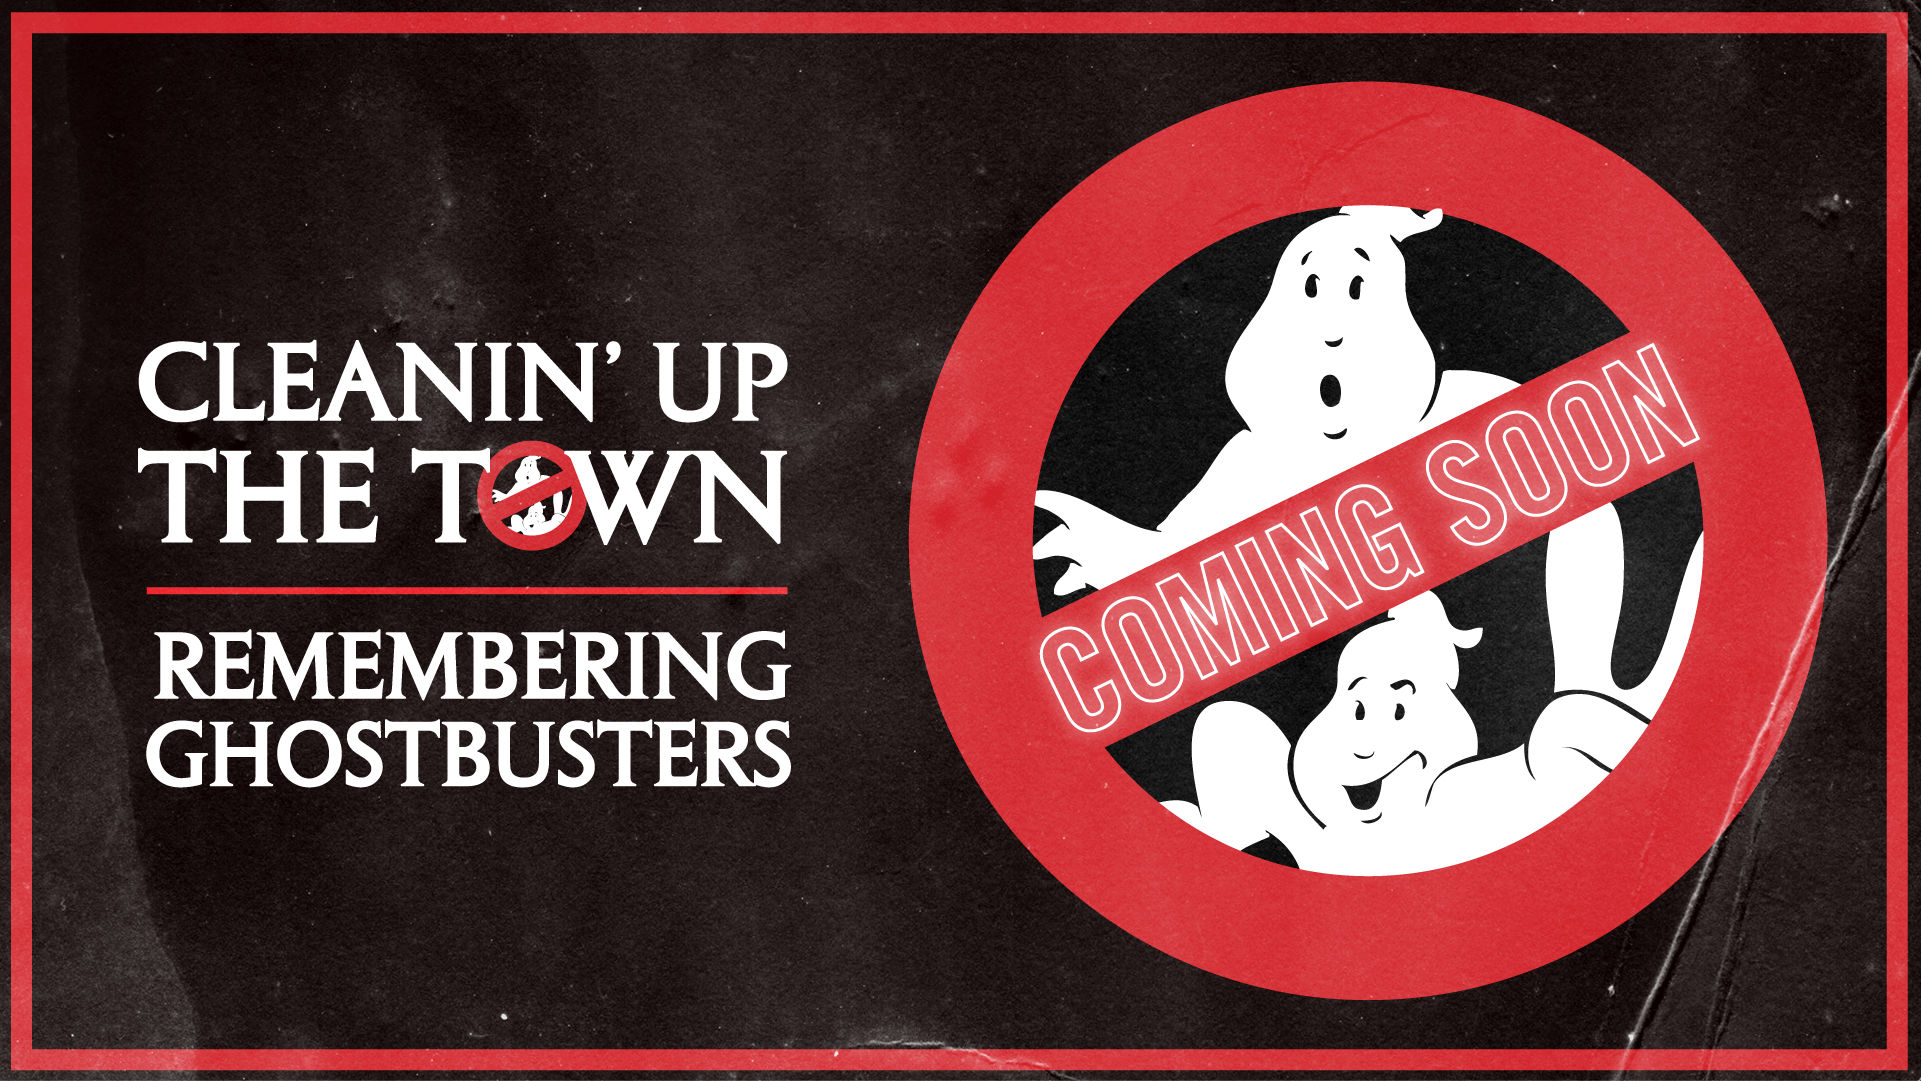 CLEANIN’ UP THE TOWN: Remembering Ghostbusters